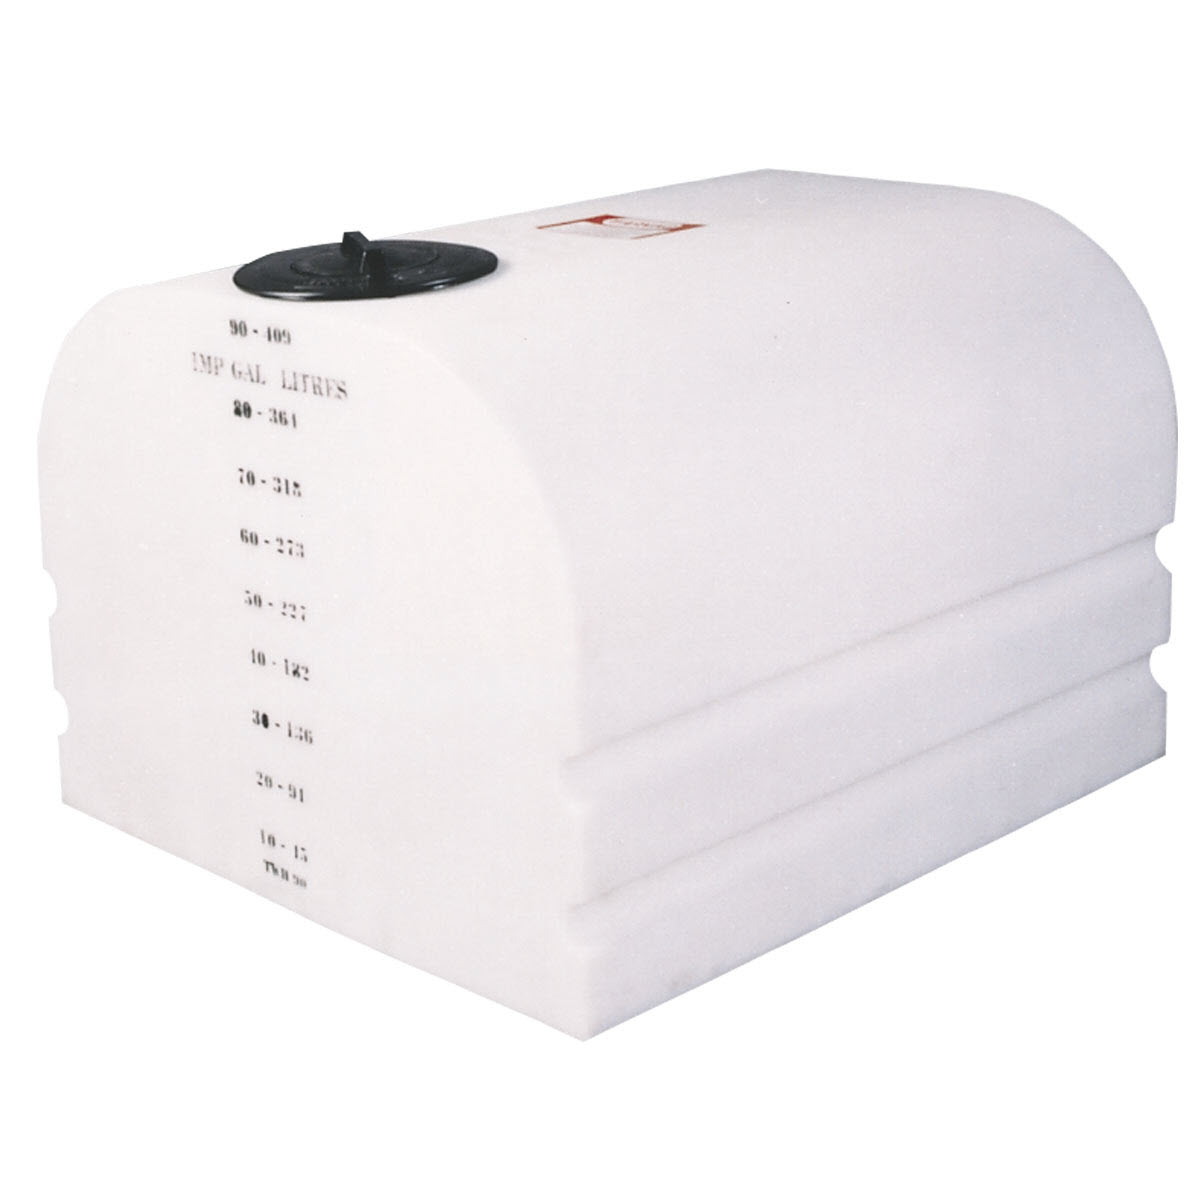 Loaf Style Transport Water Tank - White - 90 Gal